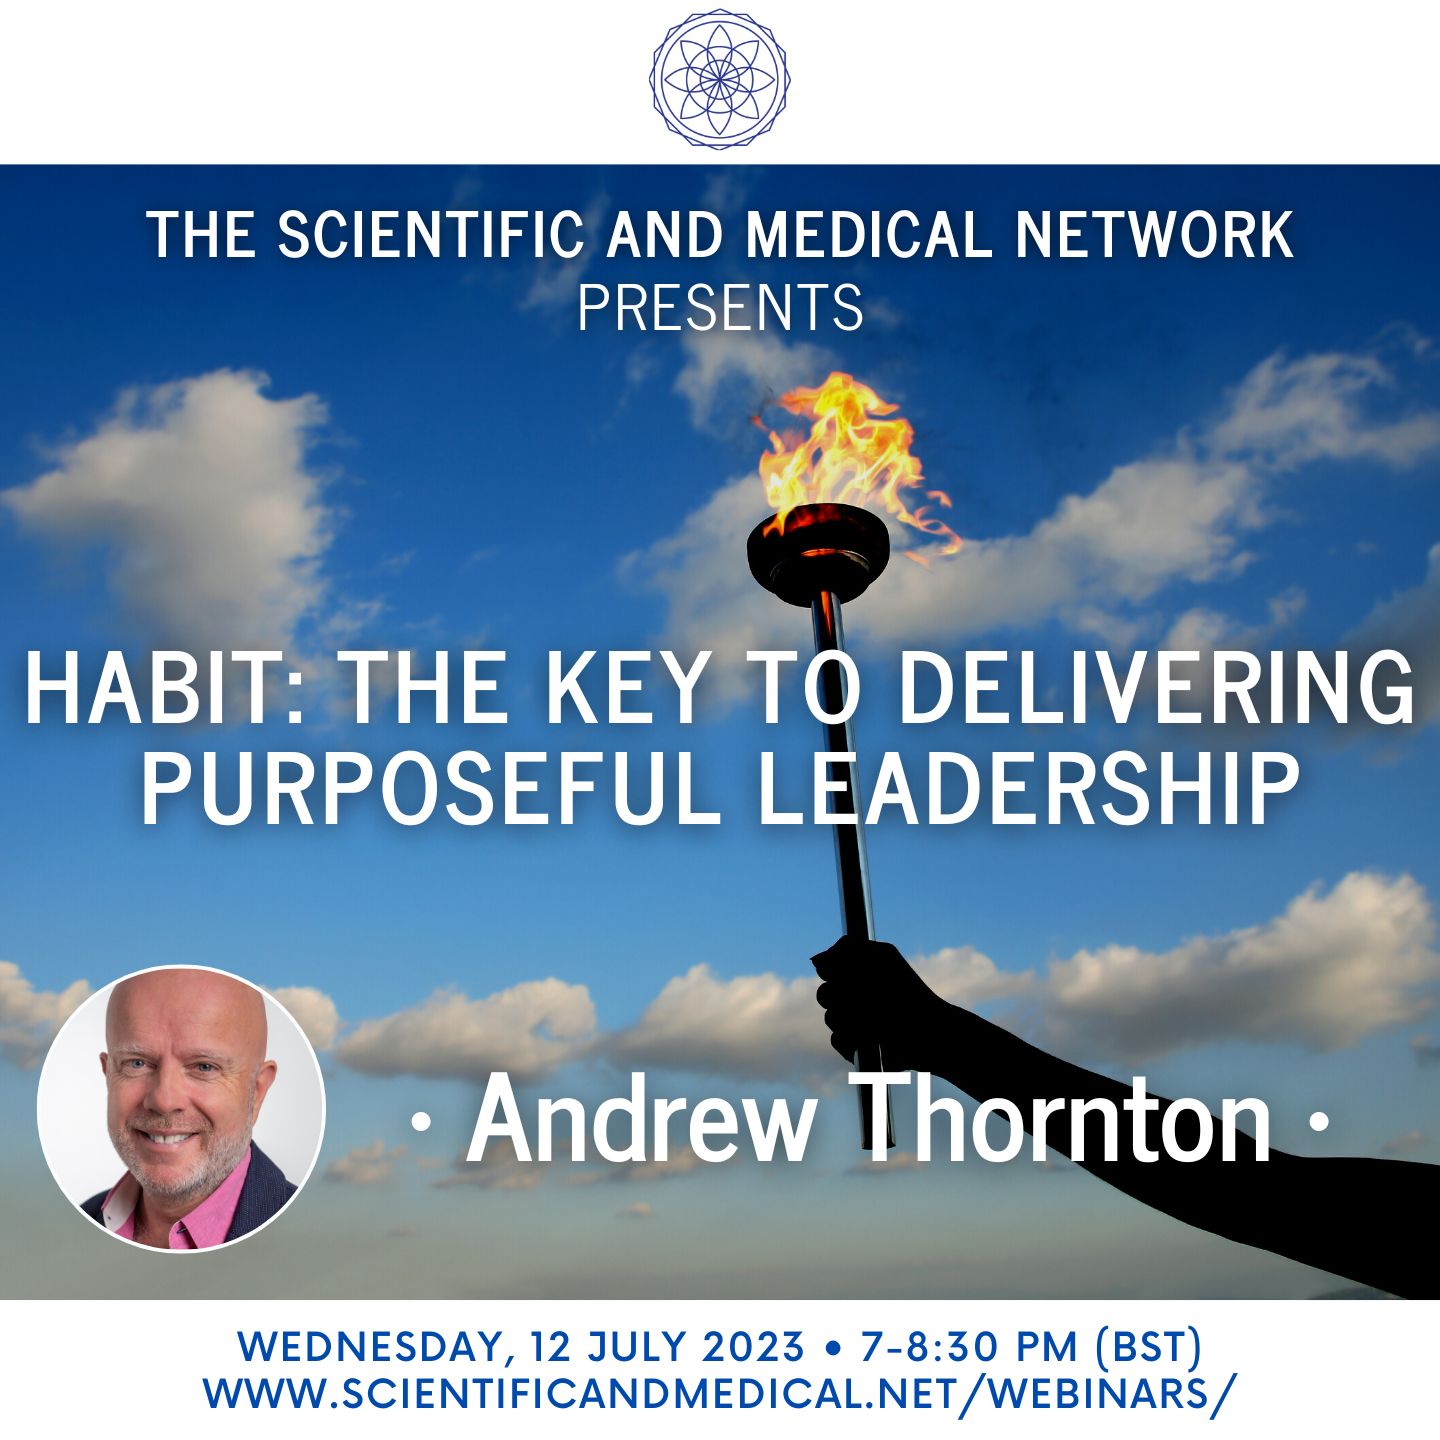 Andrew Thornton Habit The Key to Delivering Purposeful Leadership